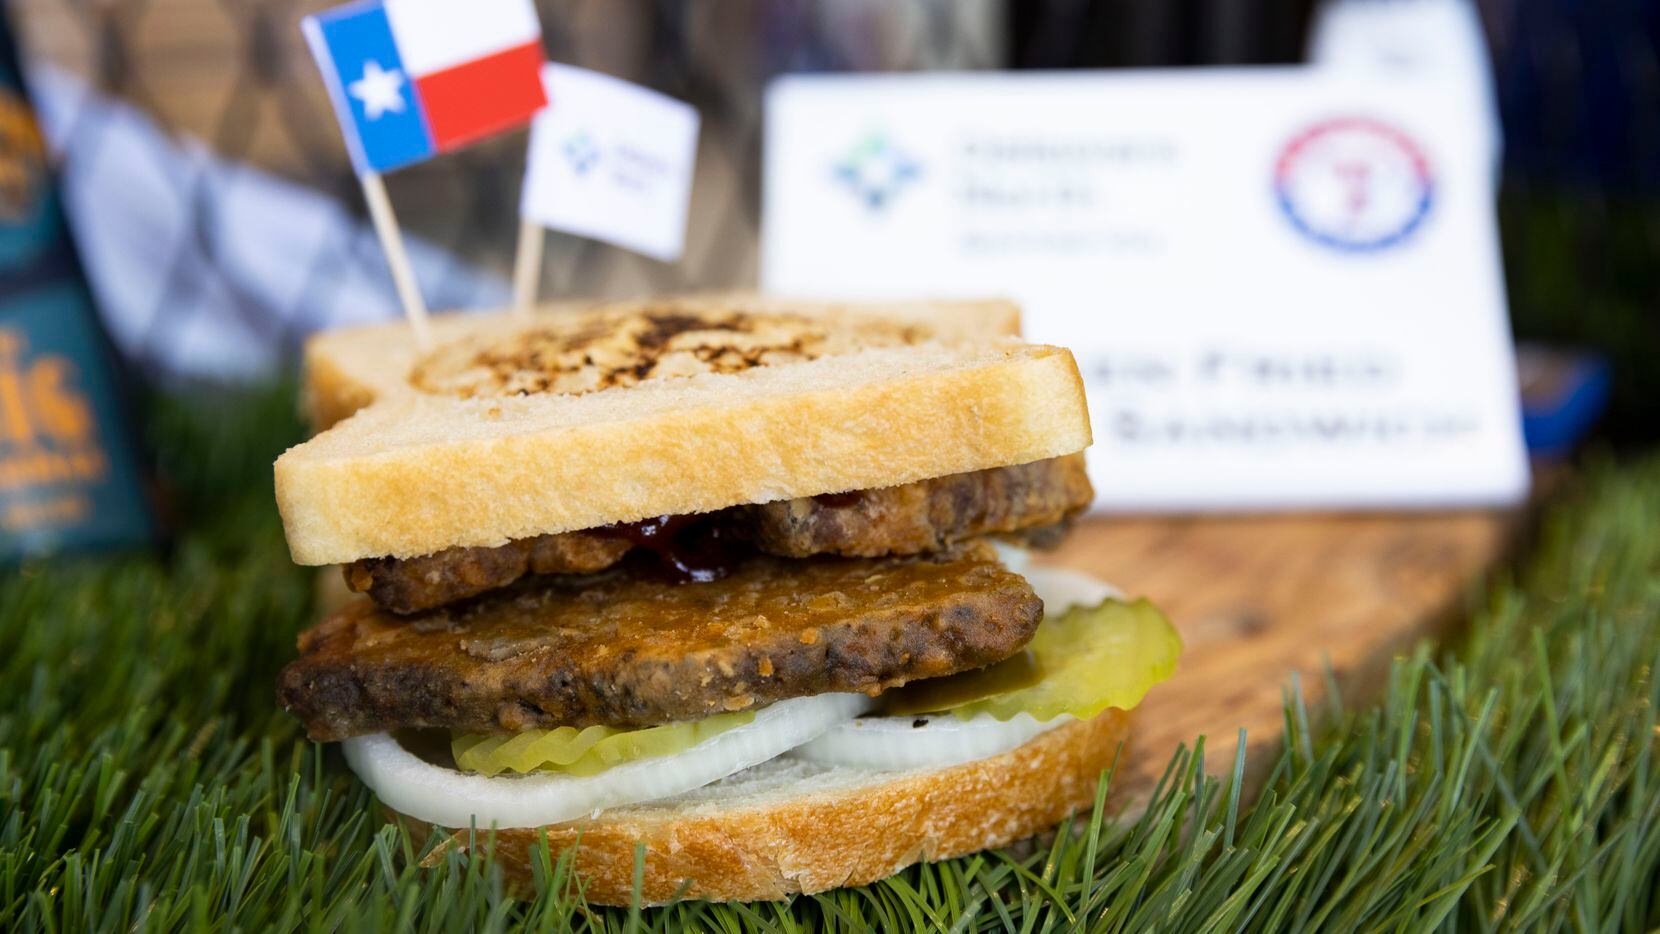 The chicken-fried brisket sandwich is one of the surprising new concessions items that will...